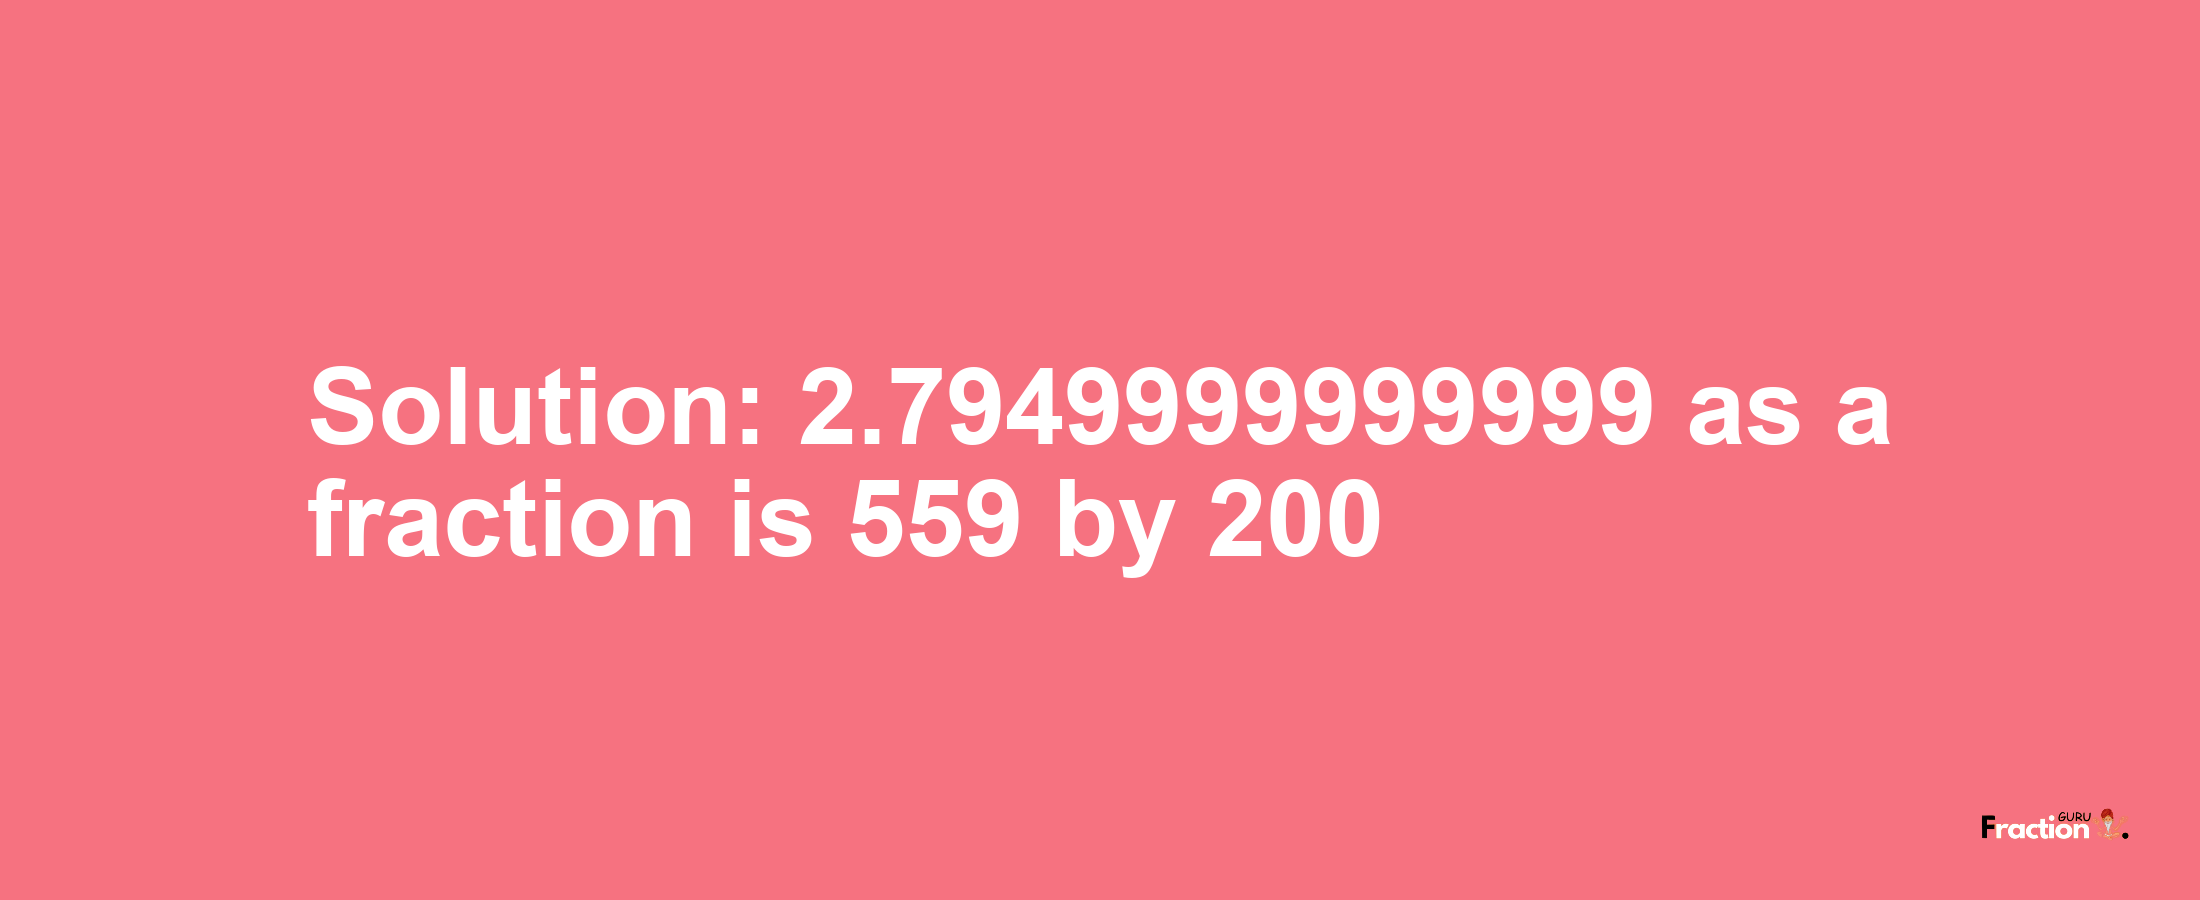 Solution:2.7949999999999 as a fraction is 559/200